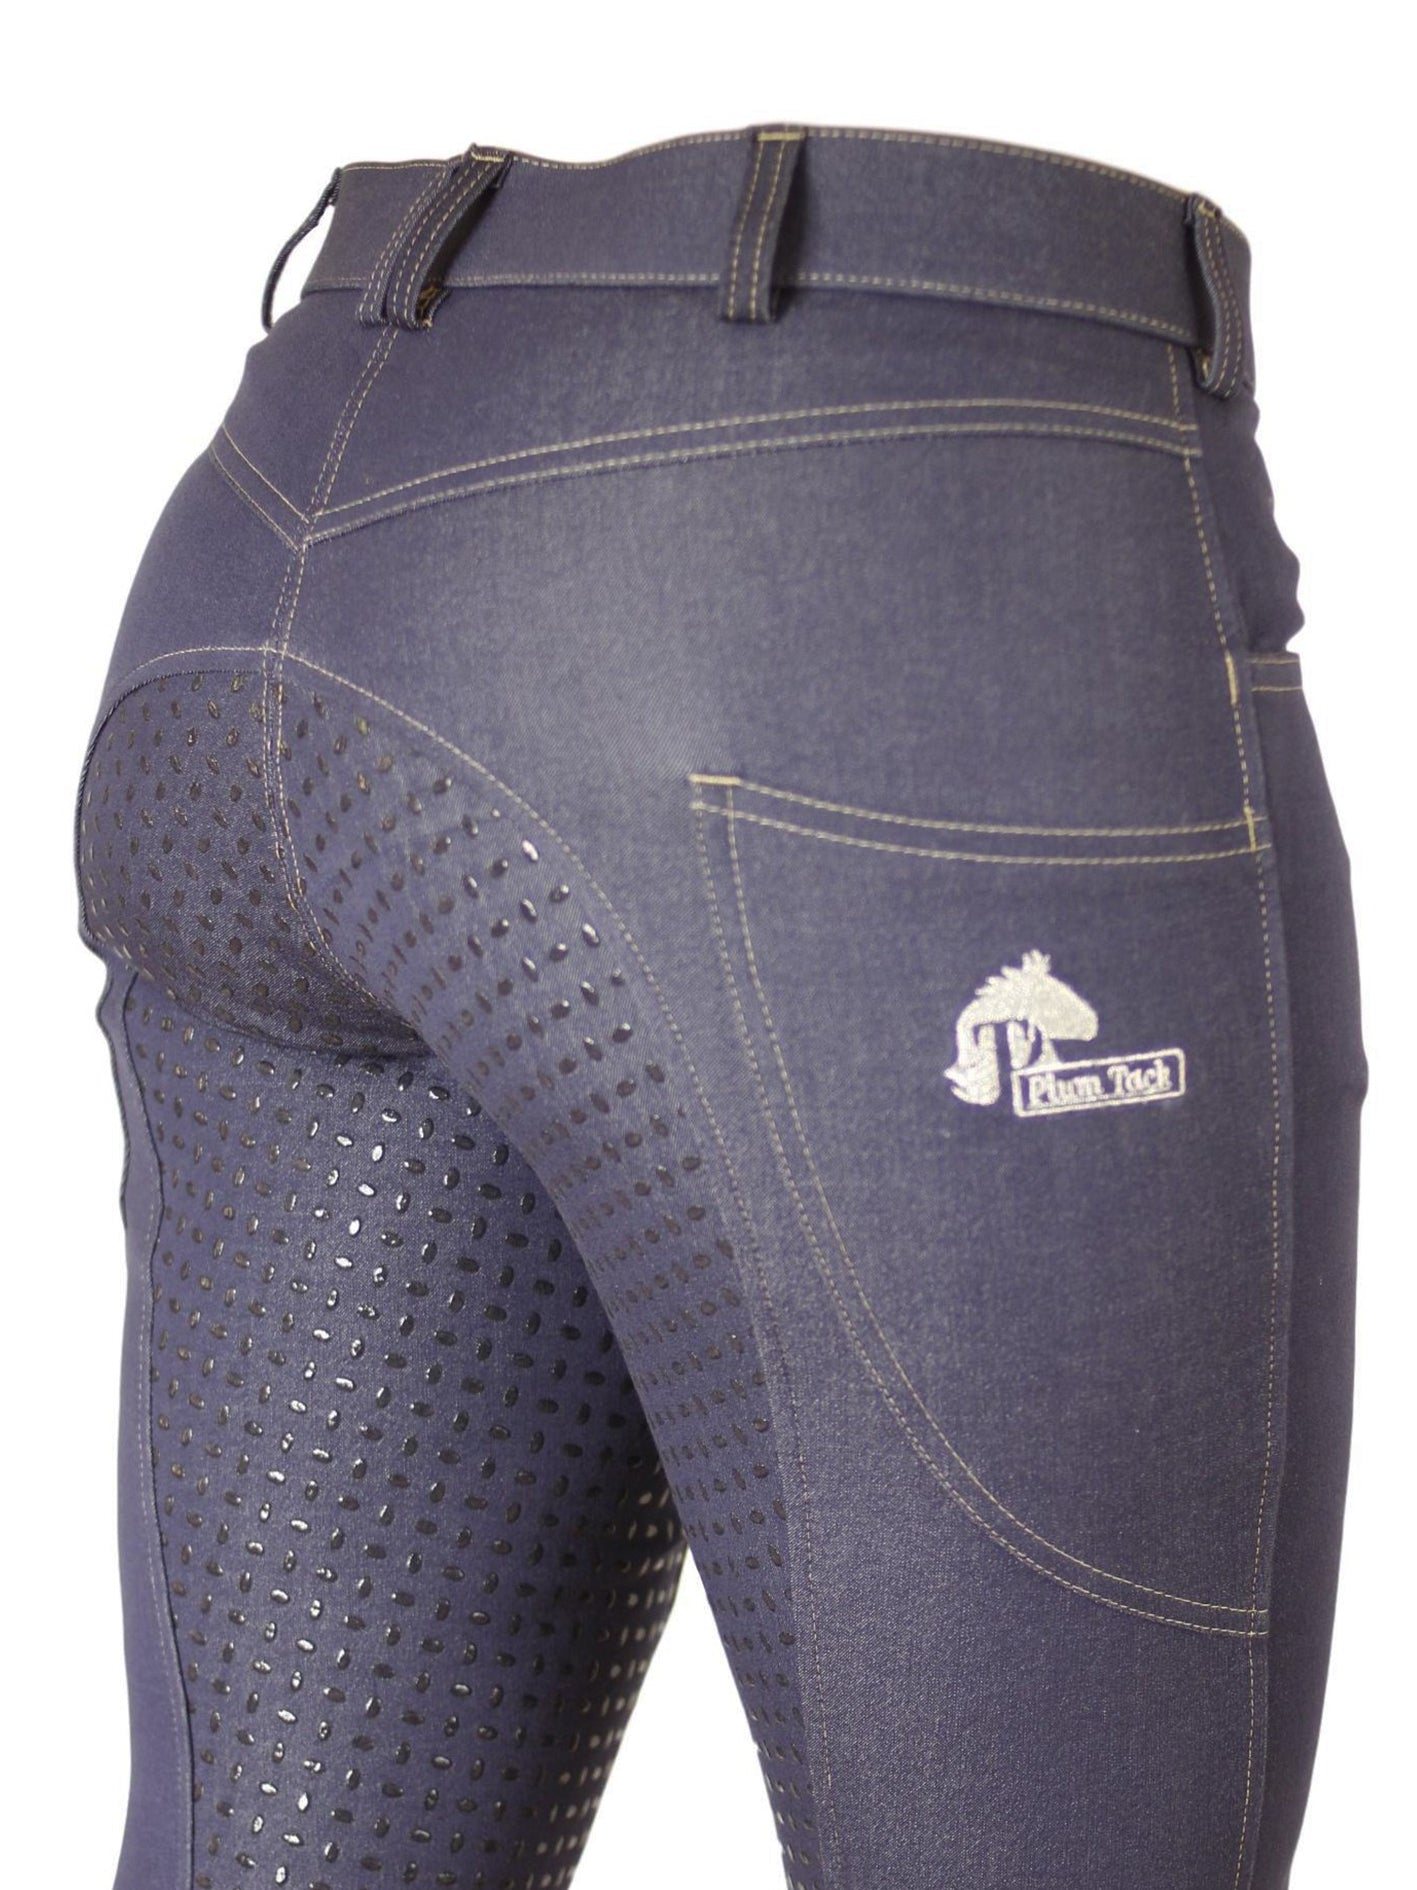 Denim Breeches With or Without Silicone Seat